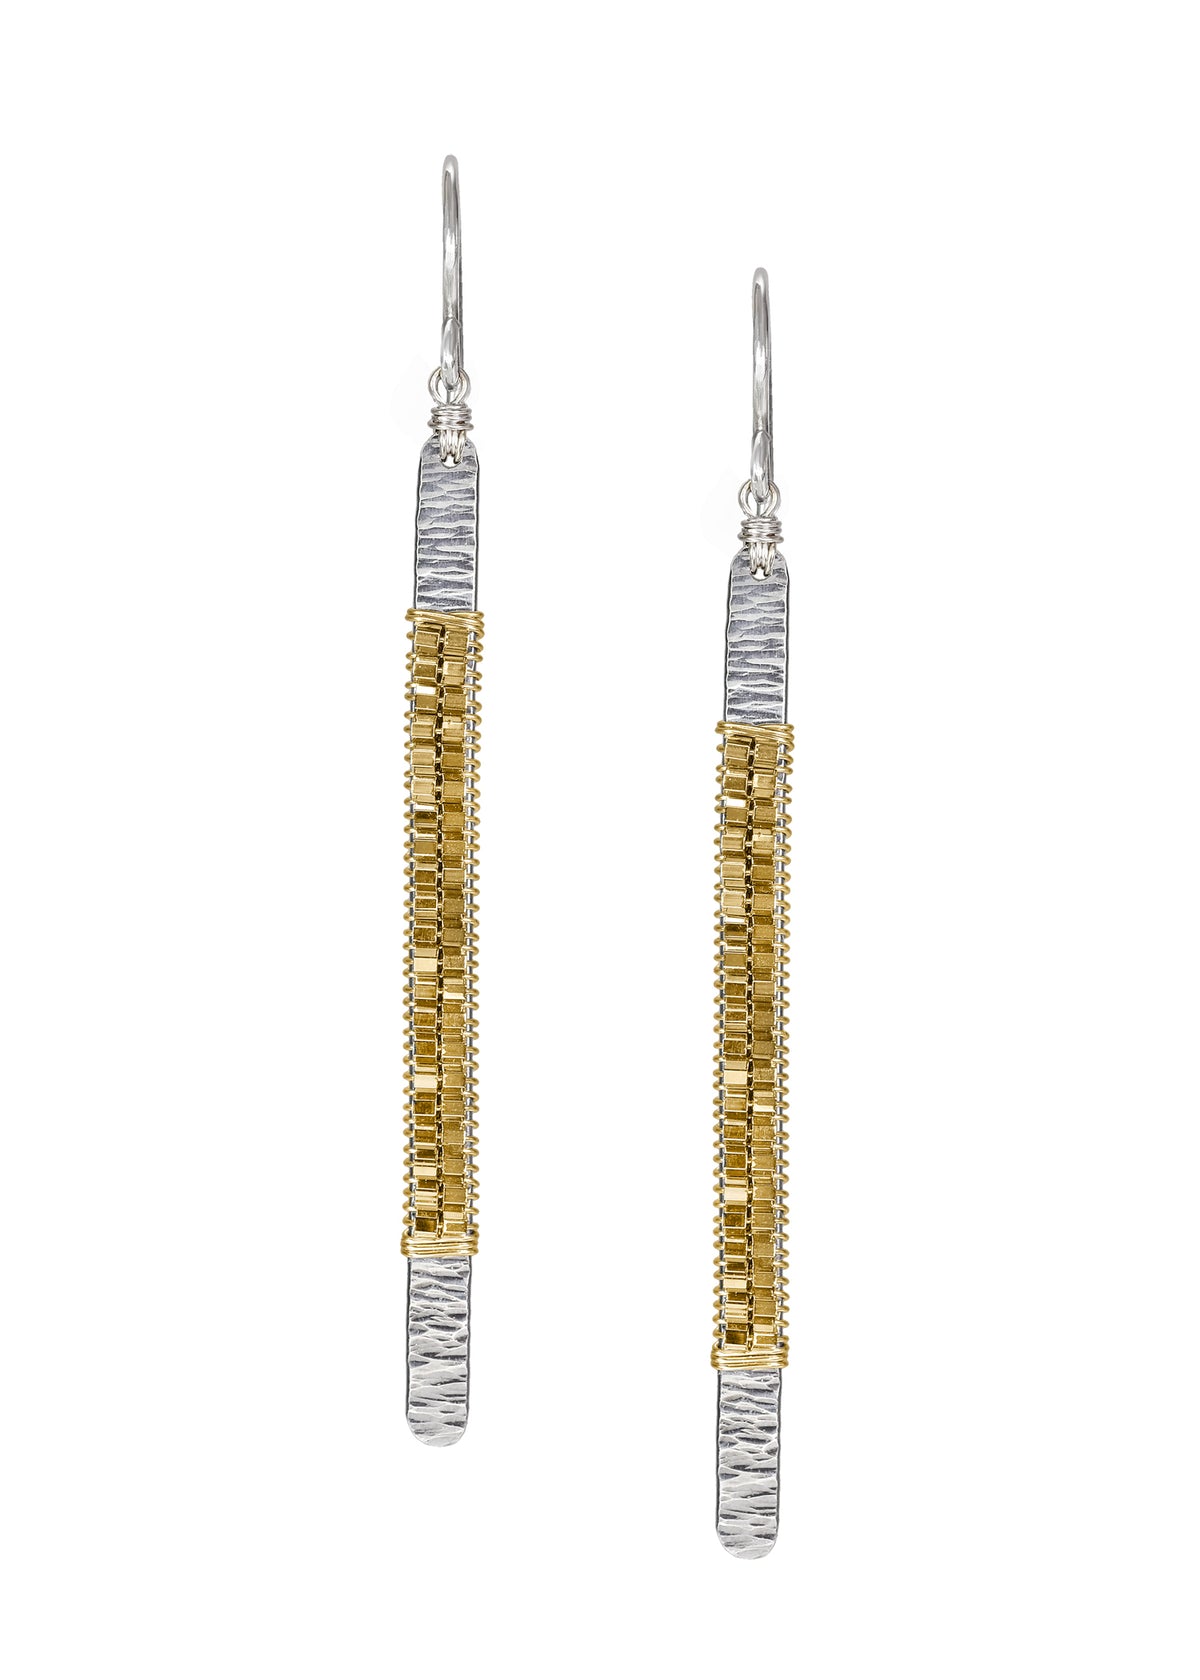 14k gold fill Sterling silver Seed beads Earrings measure 2-1/4&quot; in length (including the ear wires) and 1/8&quot; in width Handmade in our Los Angeles studio